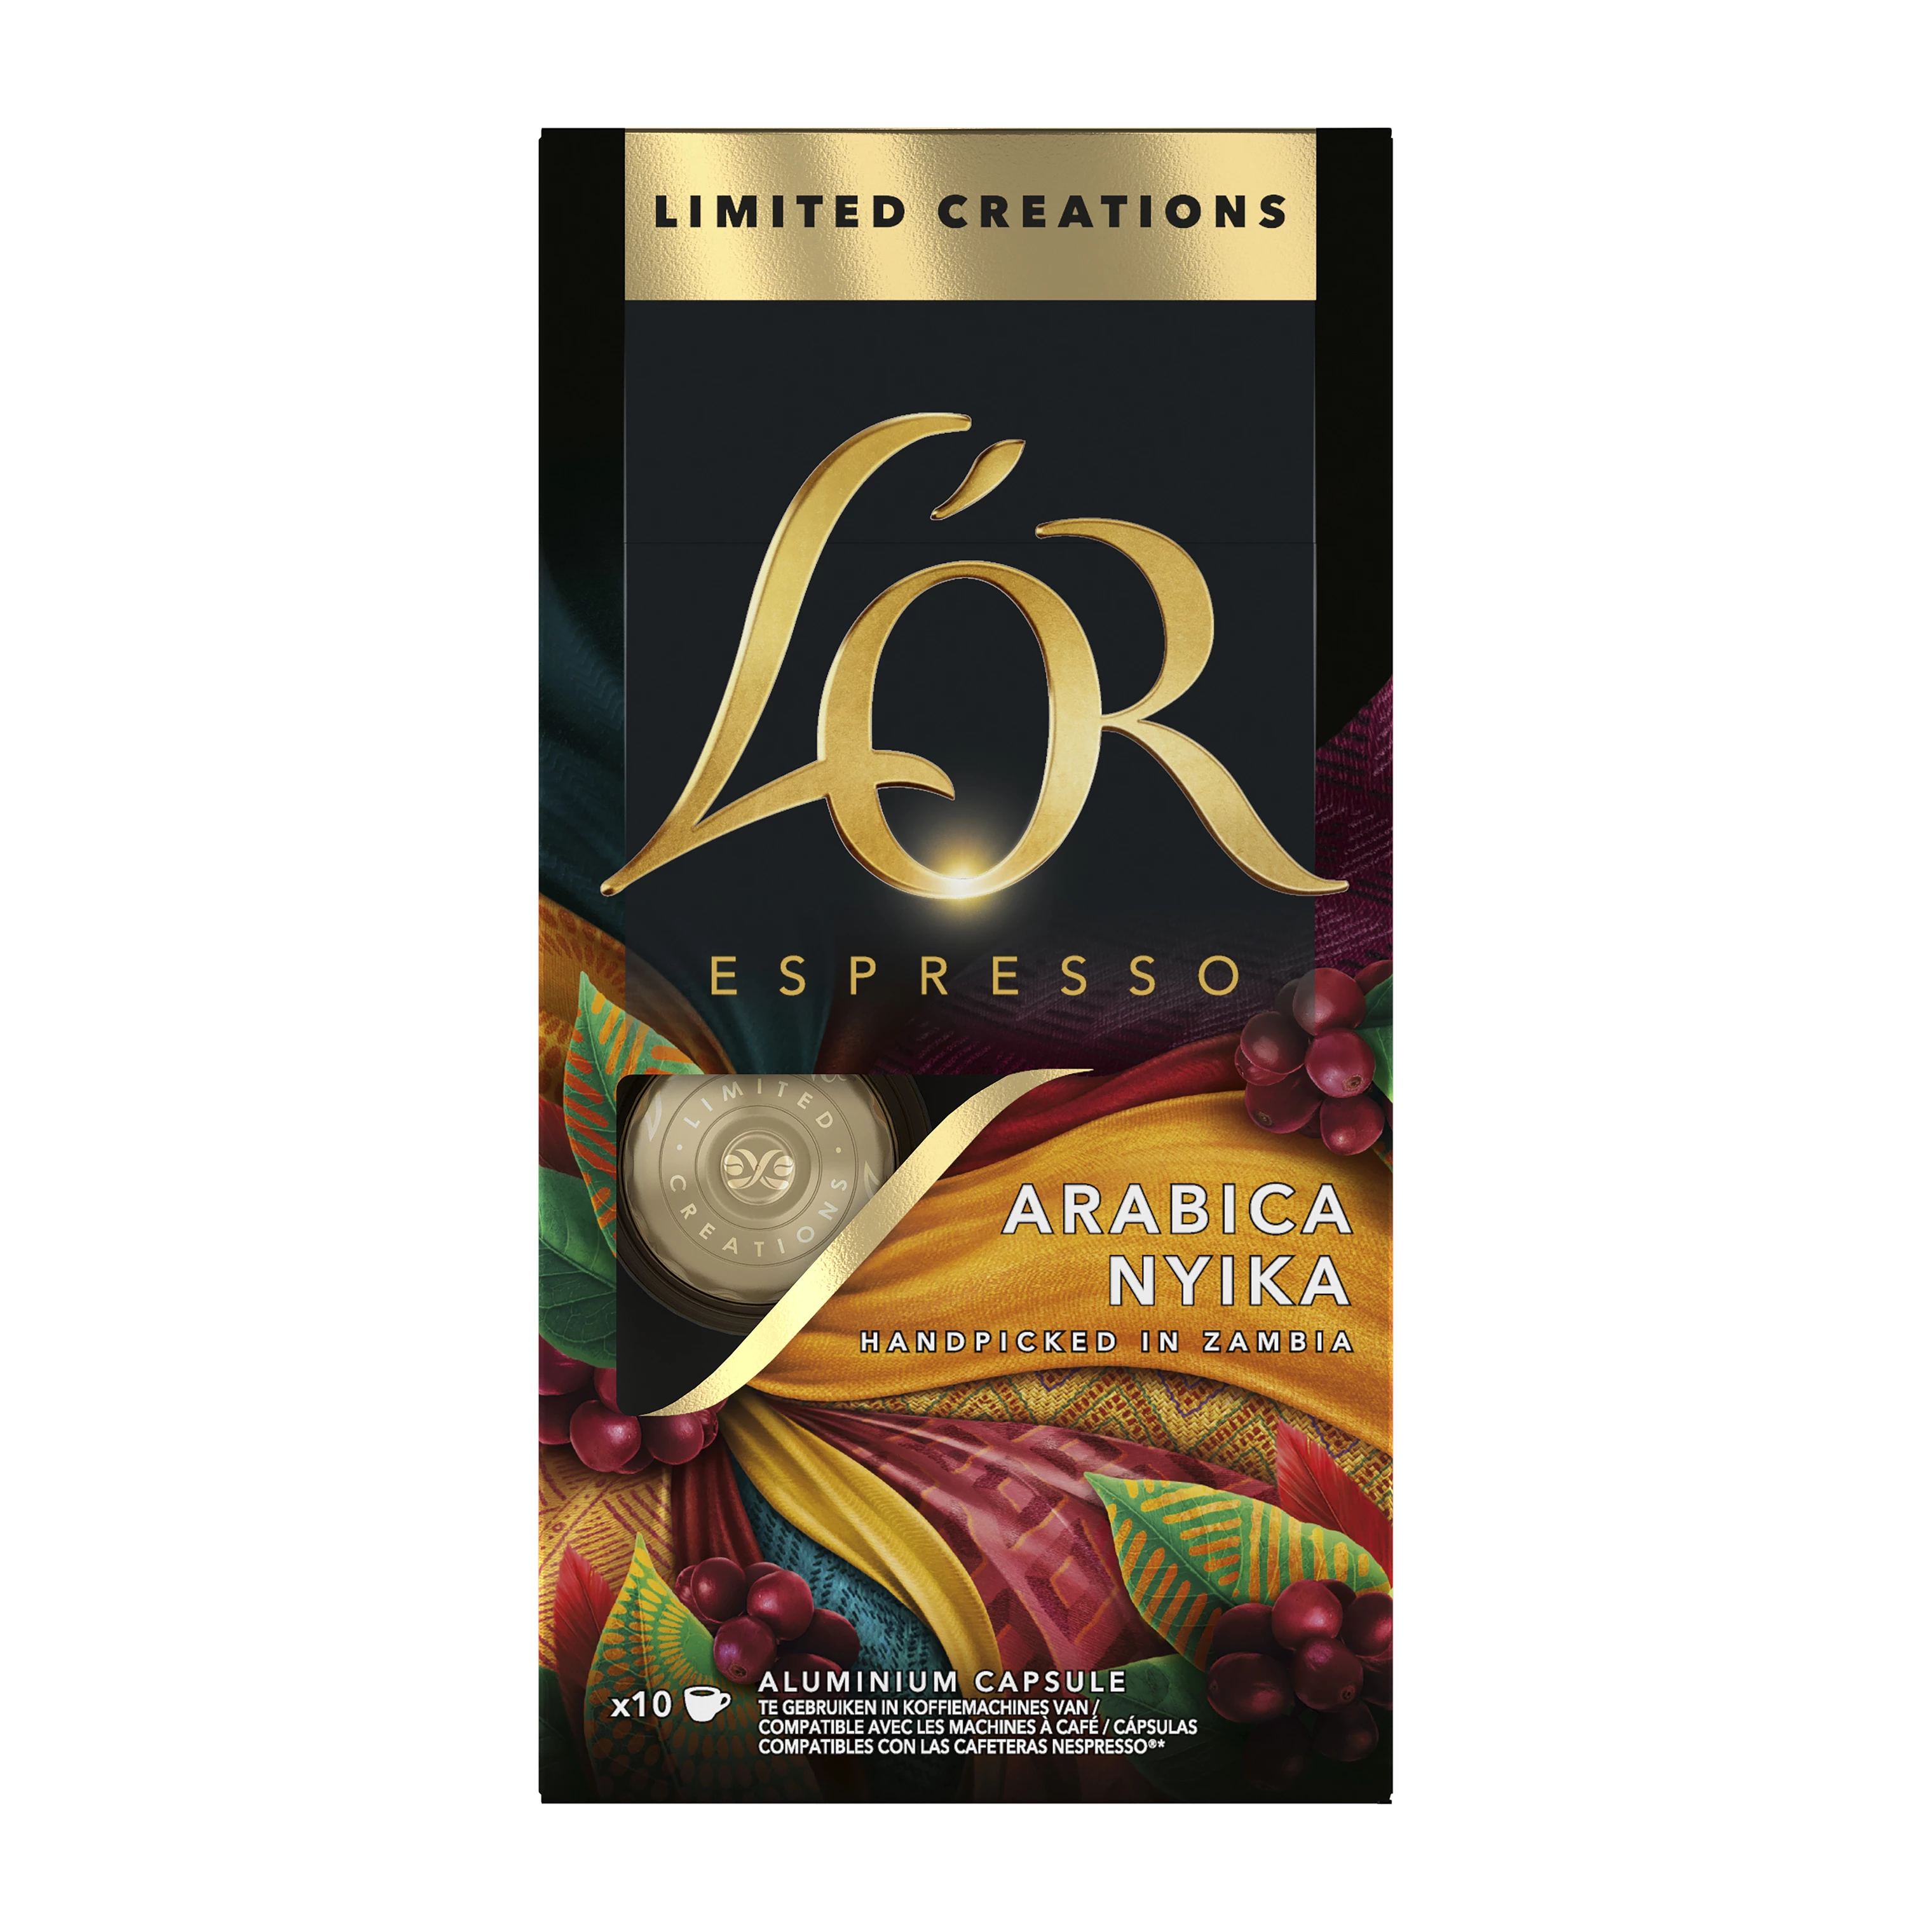 Nyika Arabica koffiecapsules Limited Edition Nespresso-compatibel x10; 52g - L'OR